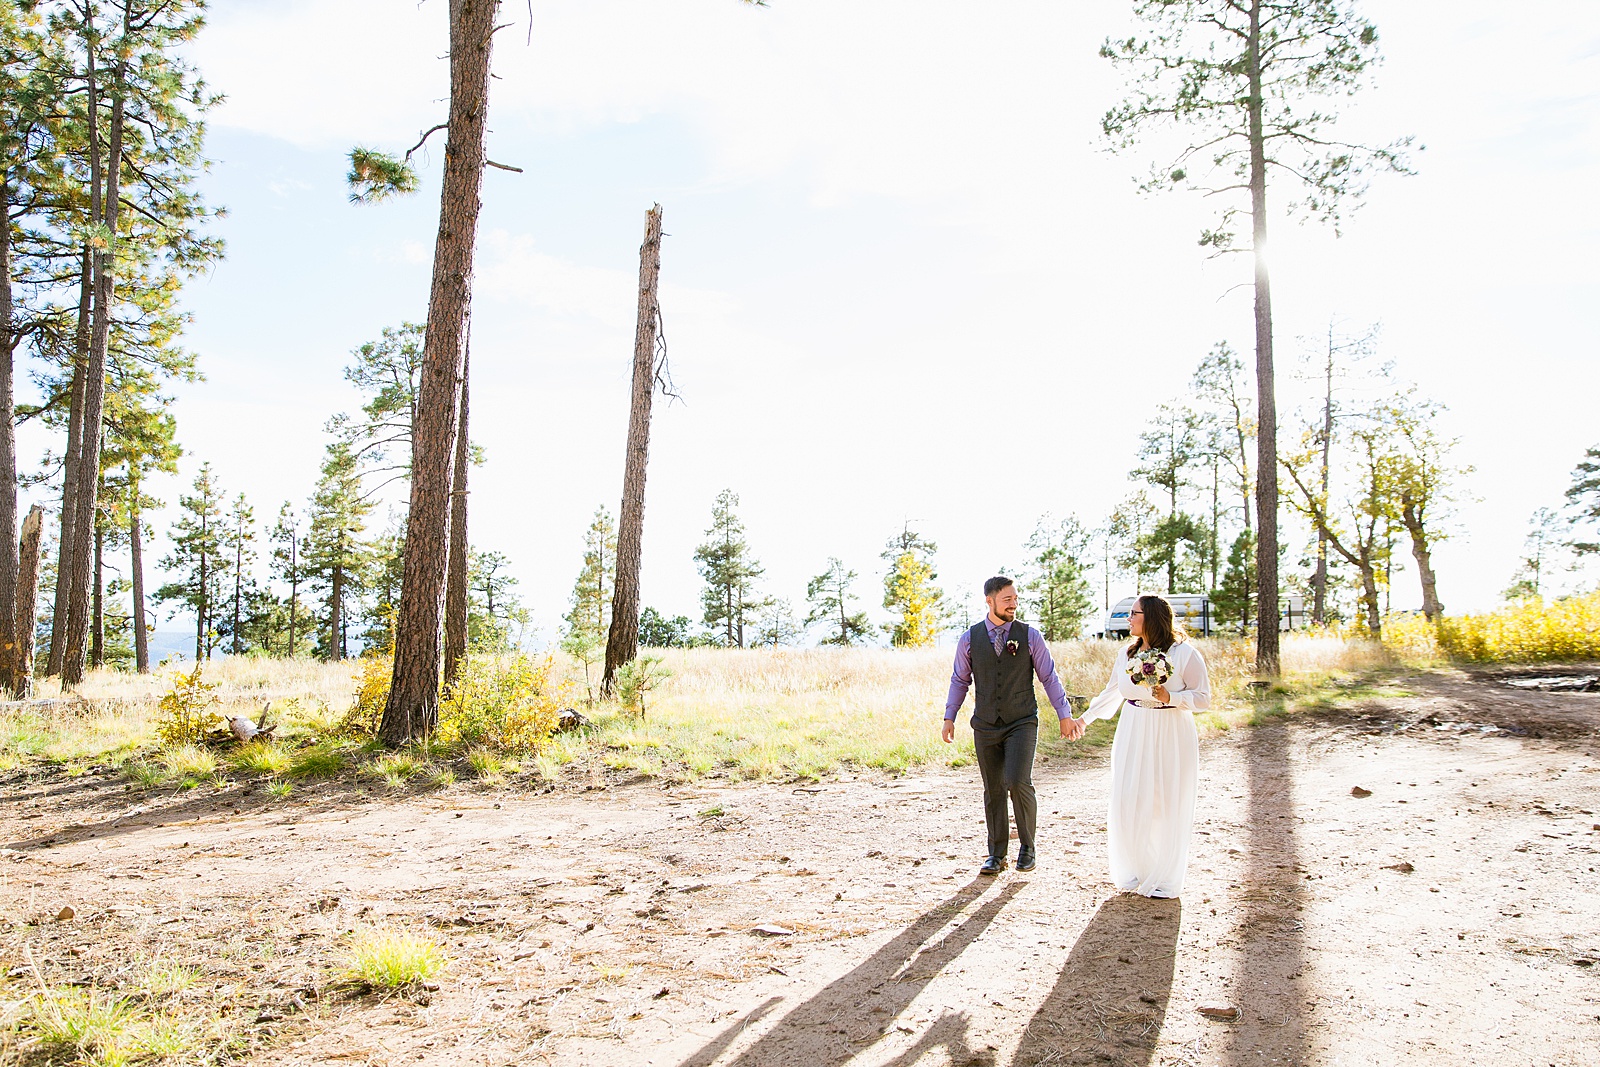 Bride and Groom walking together during their Mogollon Rim elopement by Arizona elopement photographer PMA Photography.